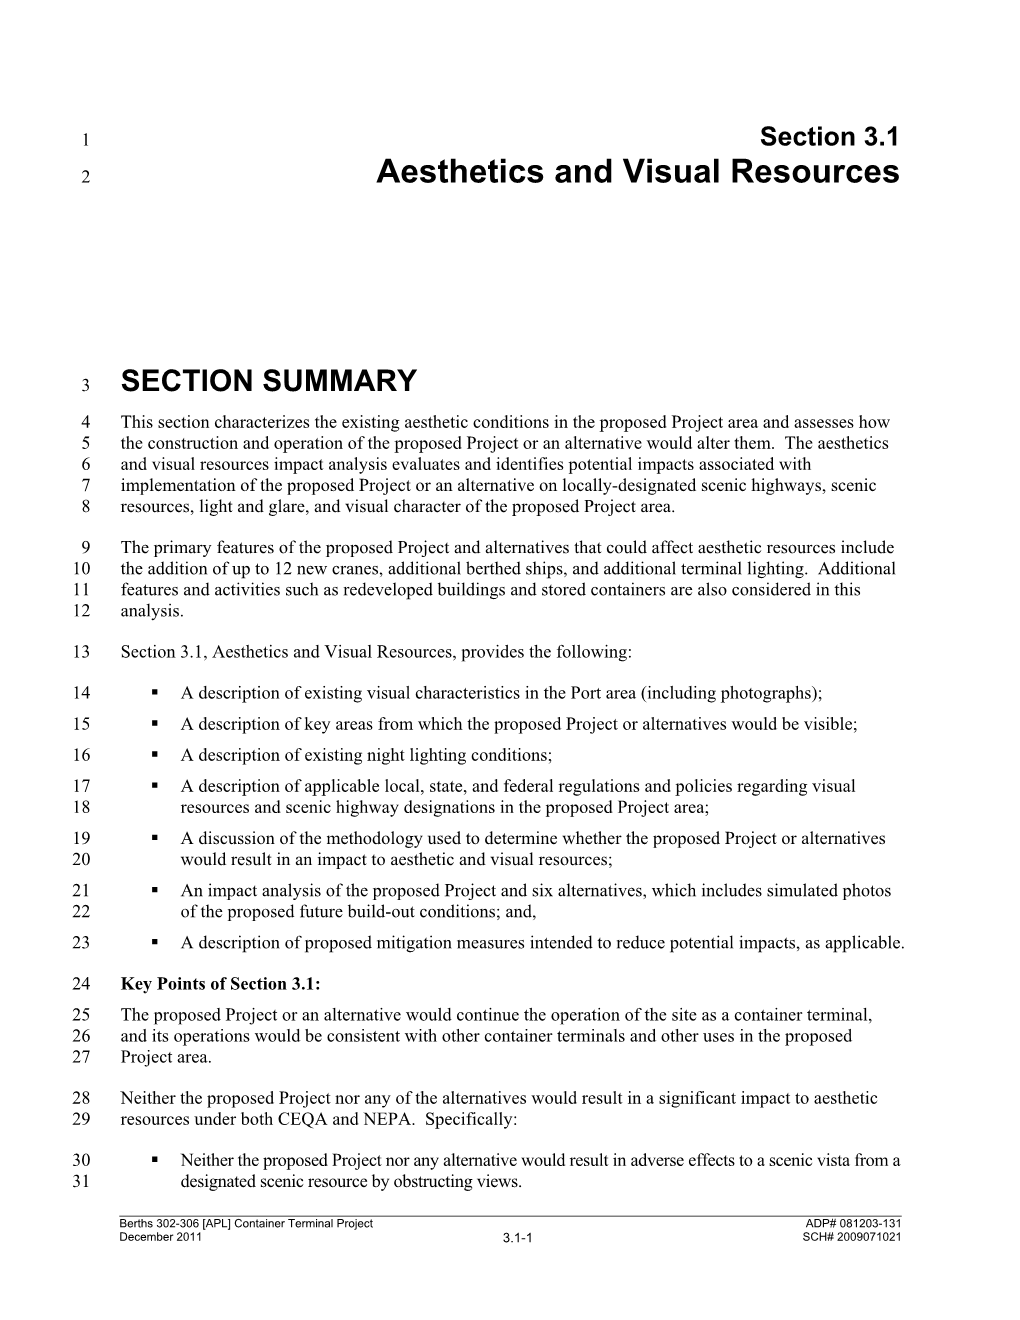 Aesthetics and Visual Resources